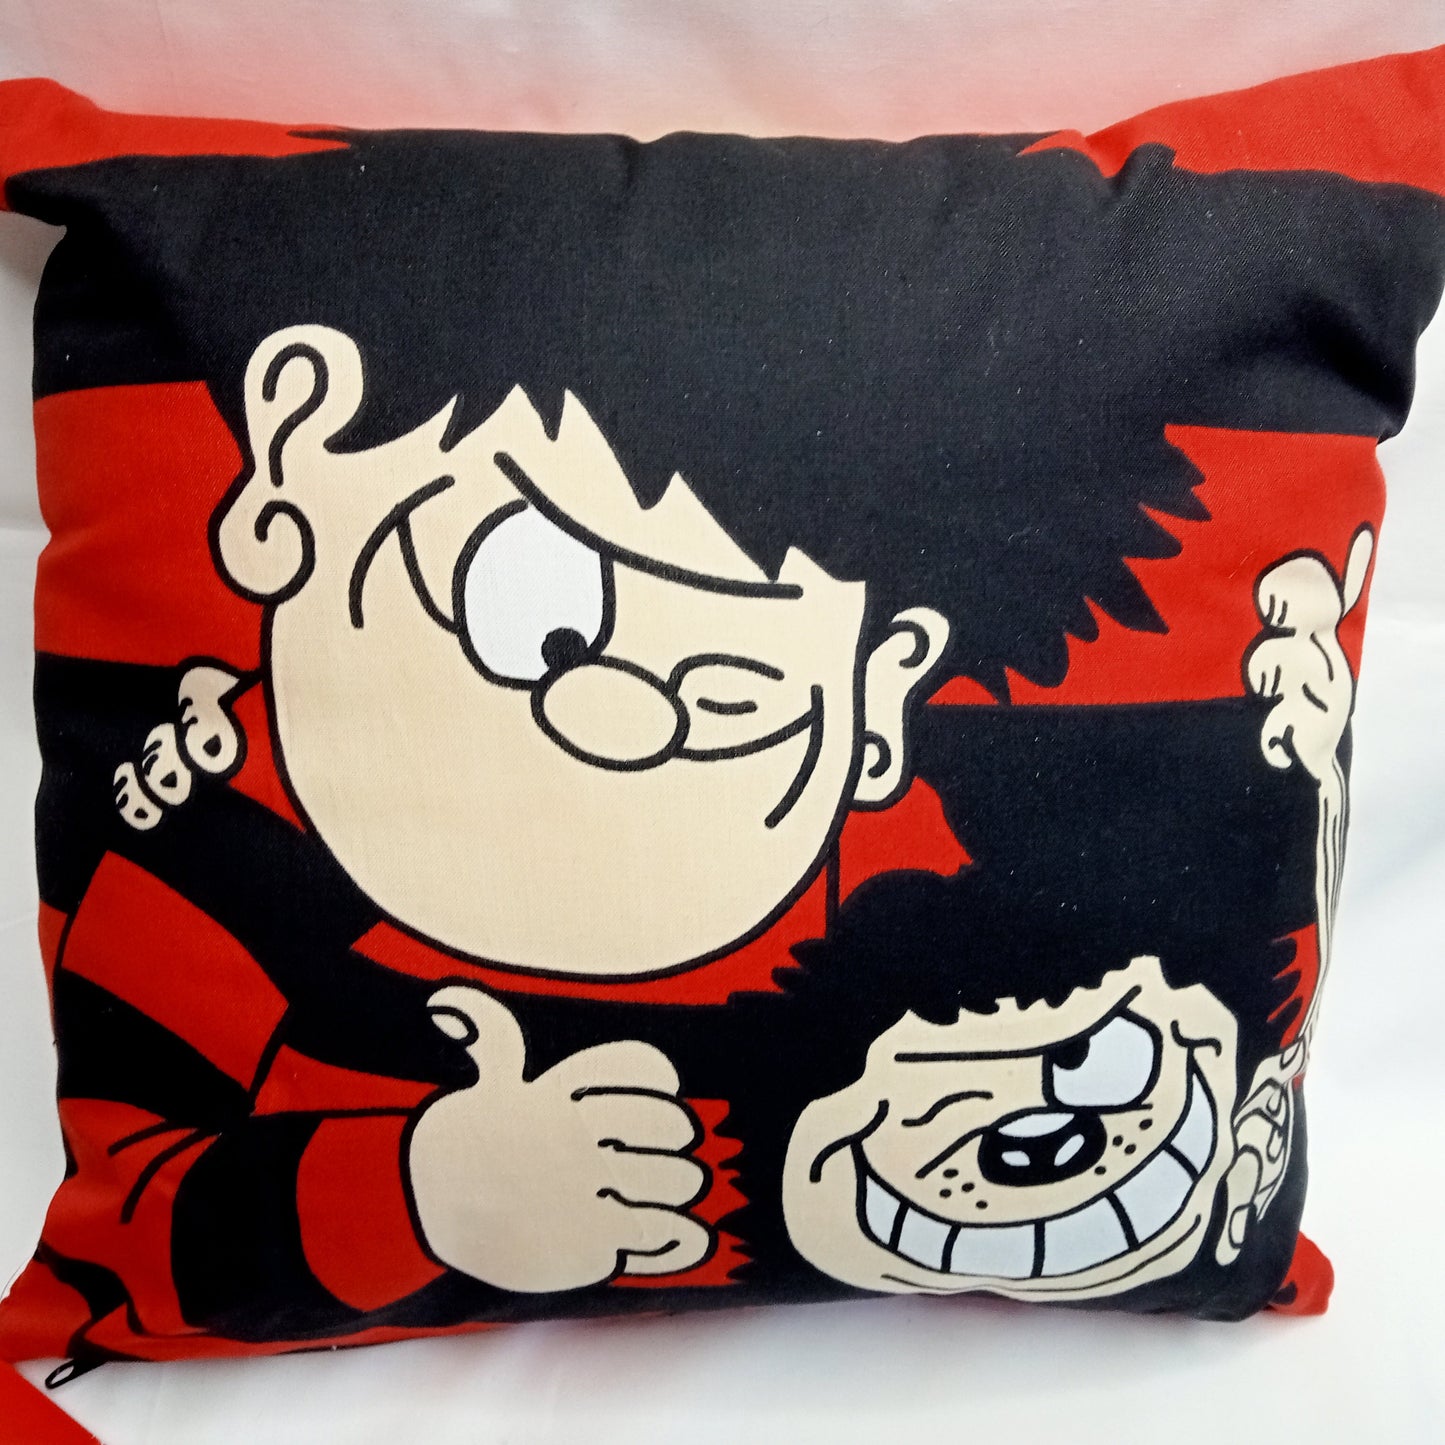 Dennis the Menace and Gnasher Cushion by the Beano